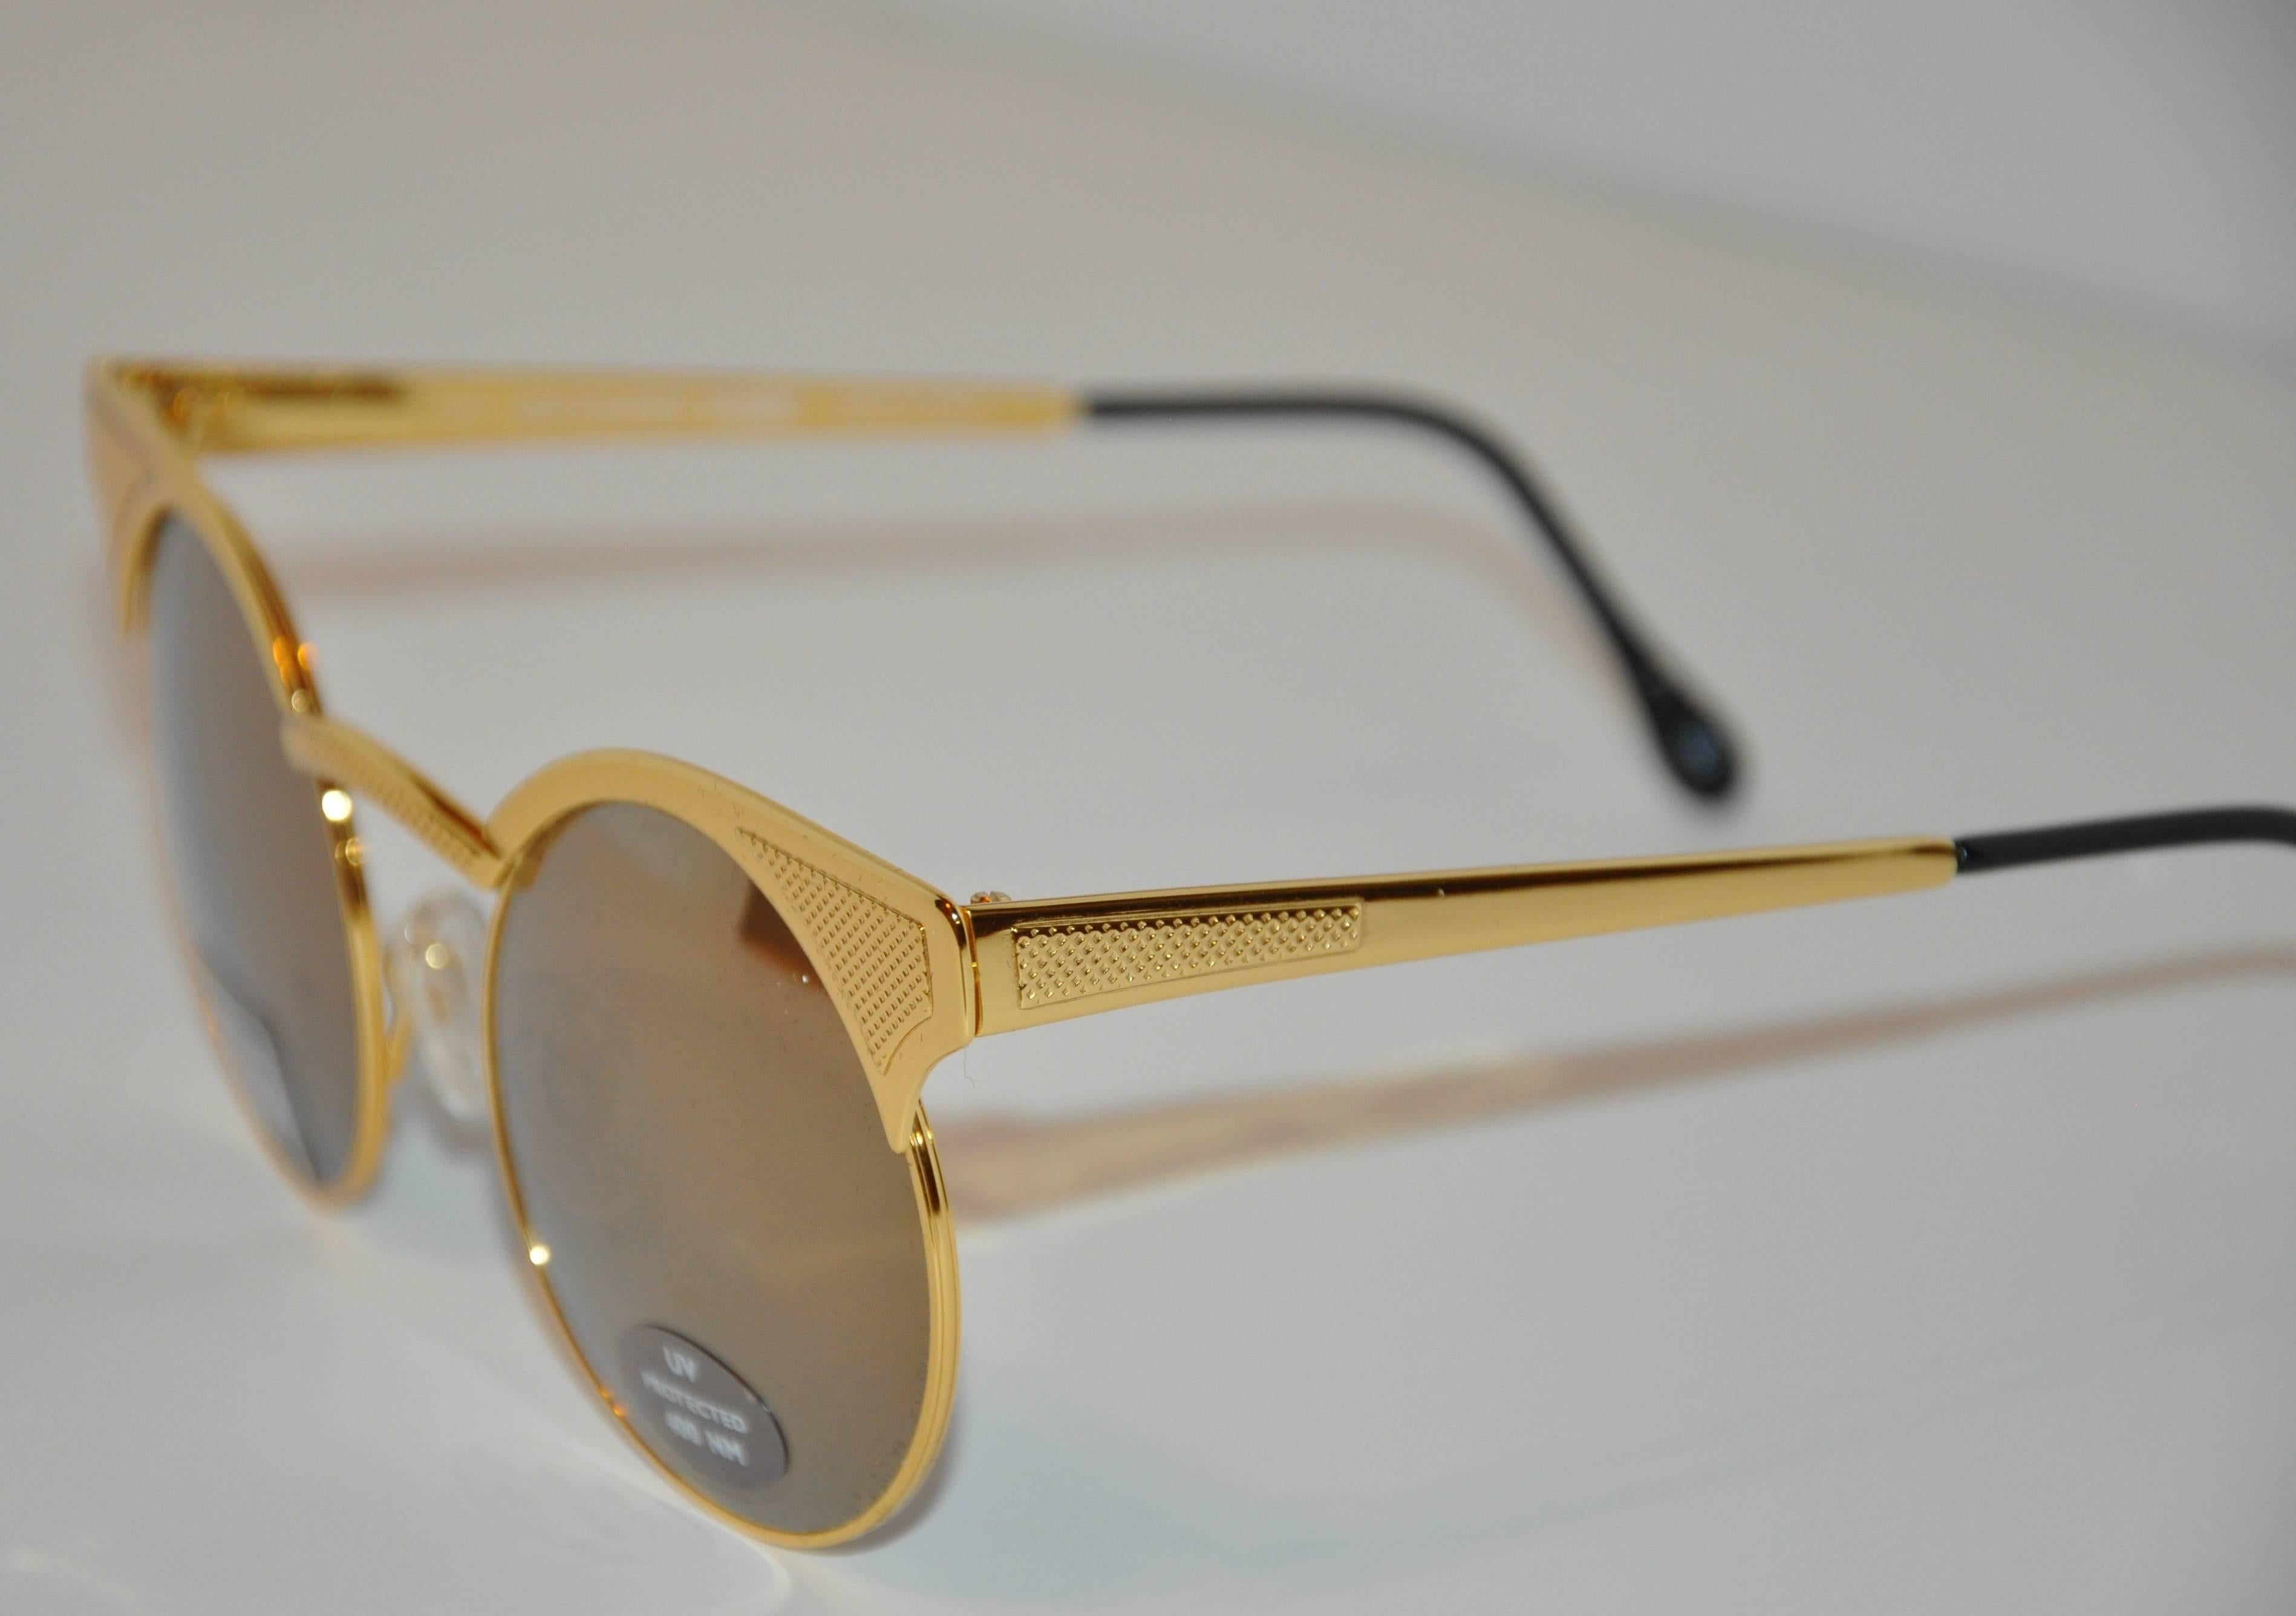        GianFranco Ferre wonderful combination of both polished and textured gold hardware frame sunglasses are finished with black lucite tips on the arms. The length across the front measures 5 1/4", height is 2", arms are 5" in